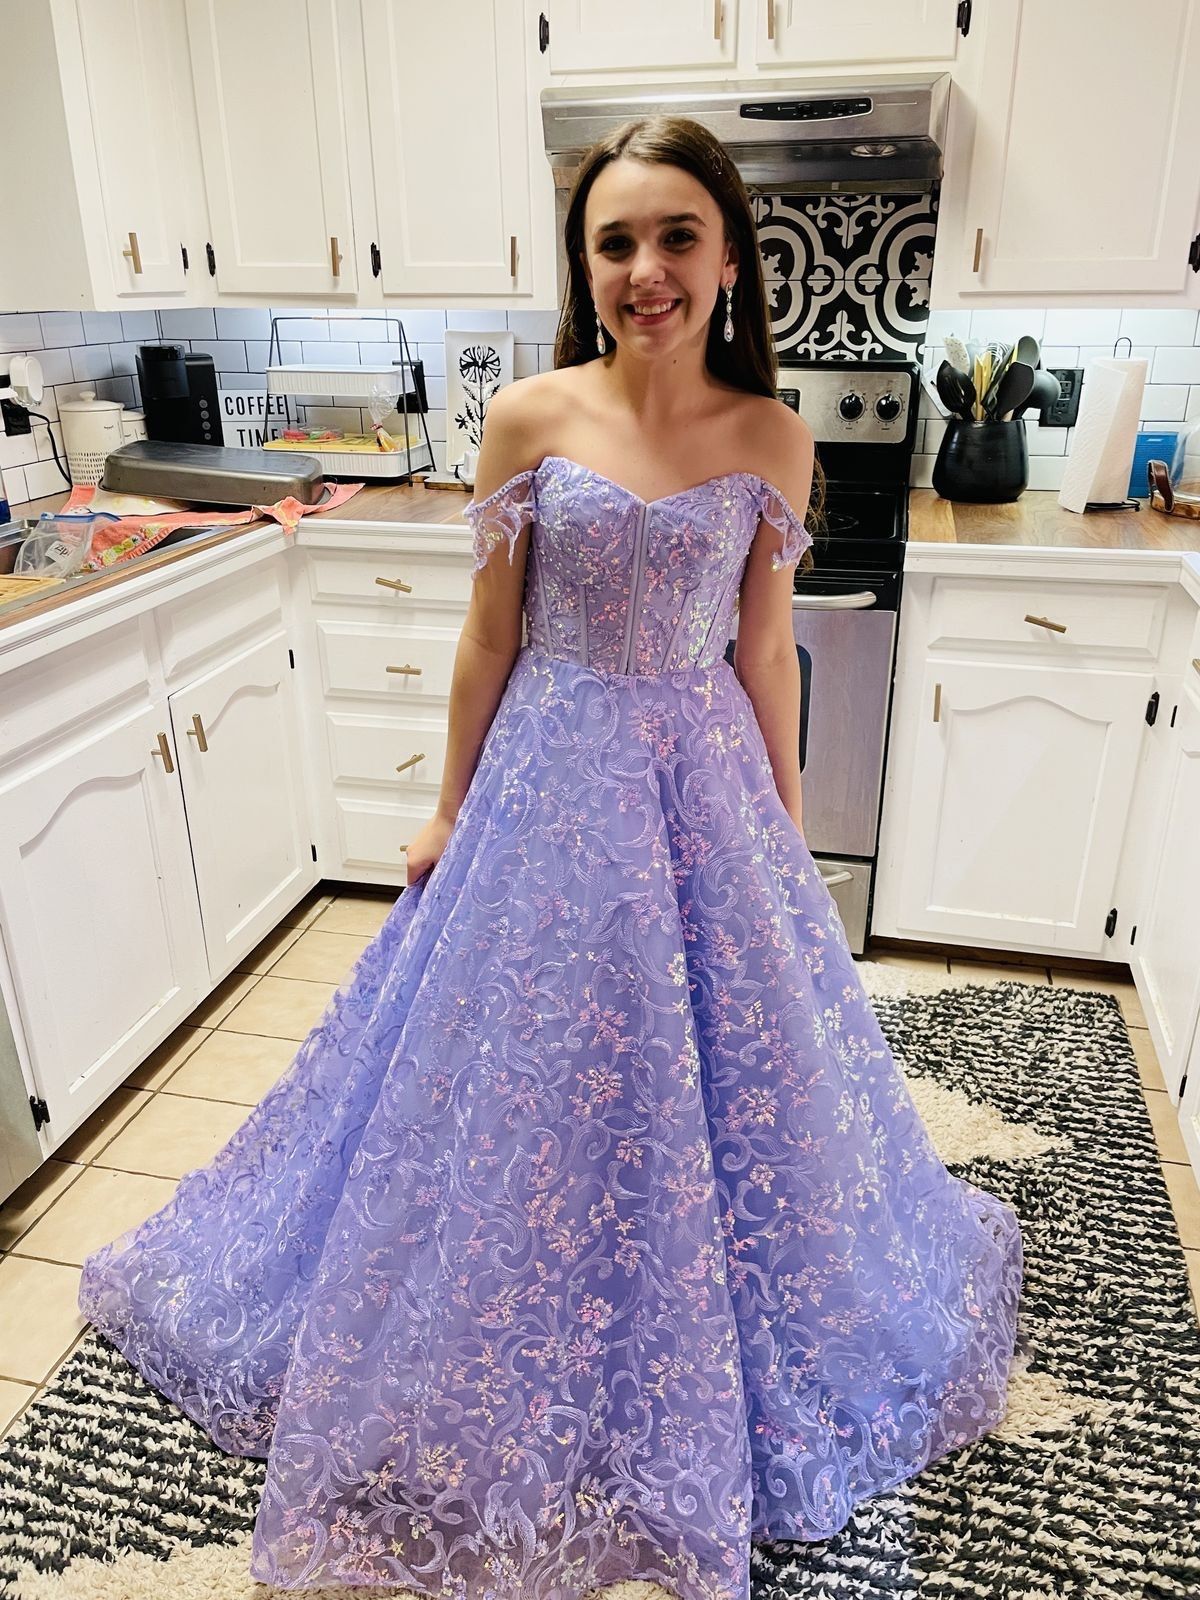 Purple One Shoulder Prom Dress: Elegant Tulle, Appliques, Beads, Crystals  Ideal For Formal And Special Occasions From Weddinggarden0931, $141.41 |  DHgate.Com